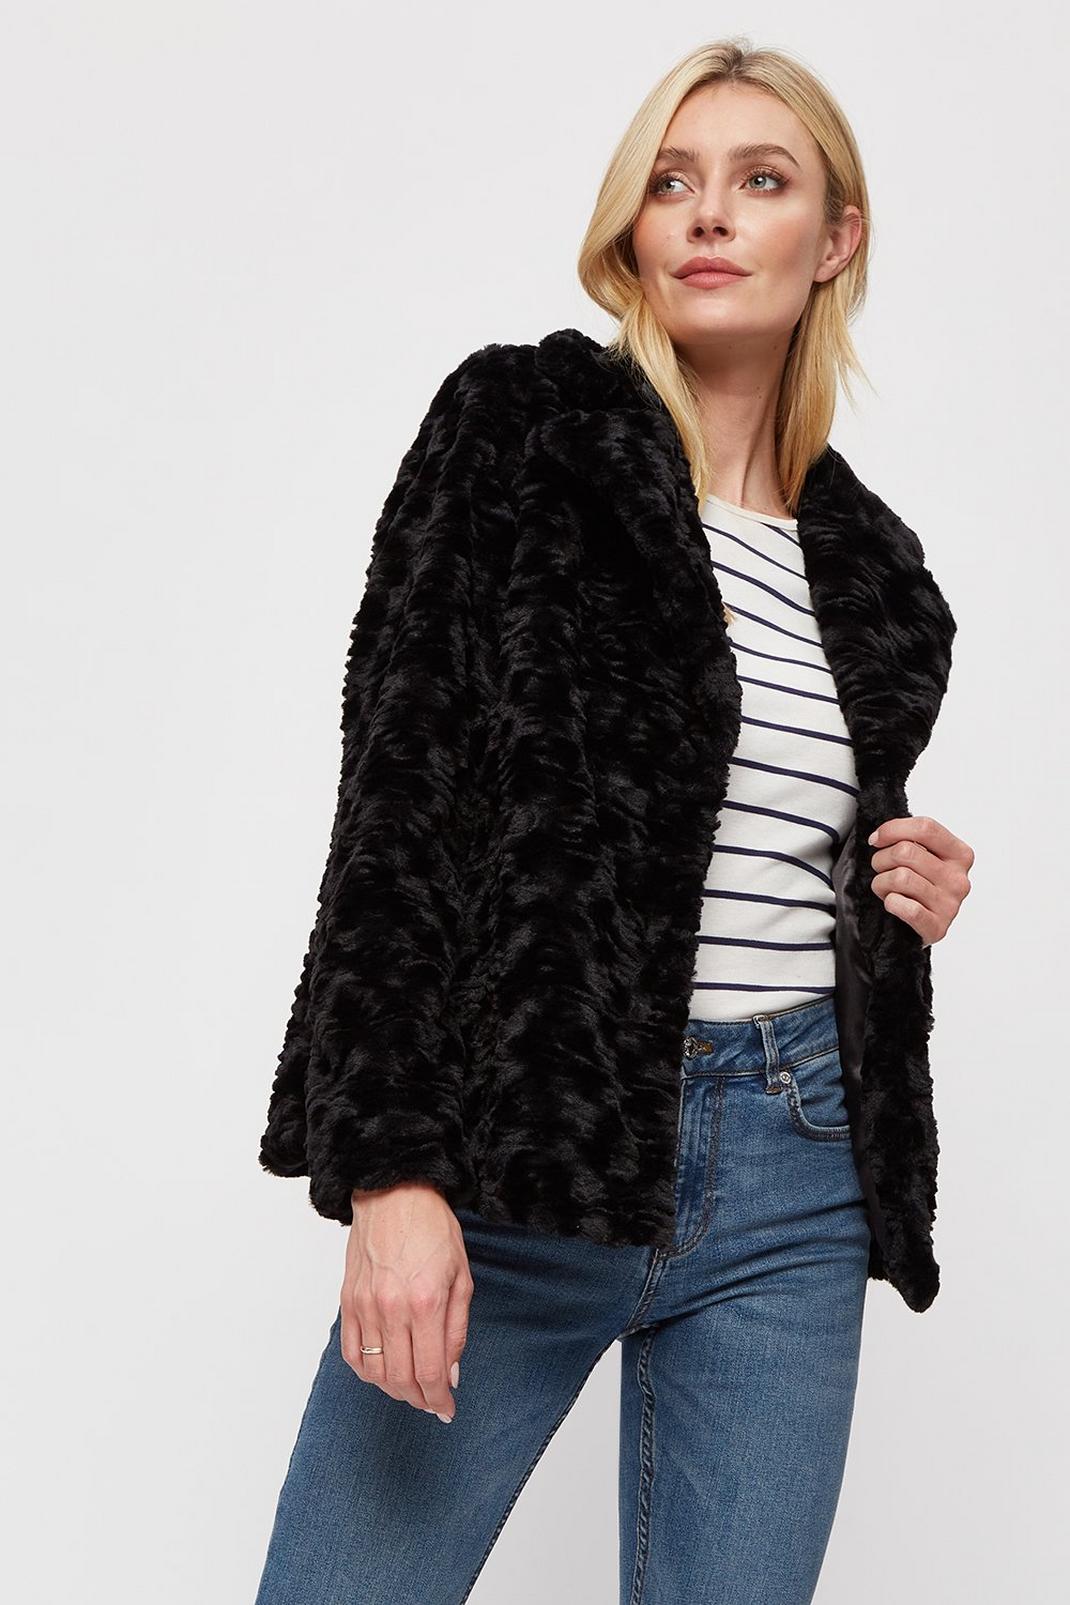 105 Collar And Revere Short Textured Ripple Faux Fur Coat image number 2